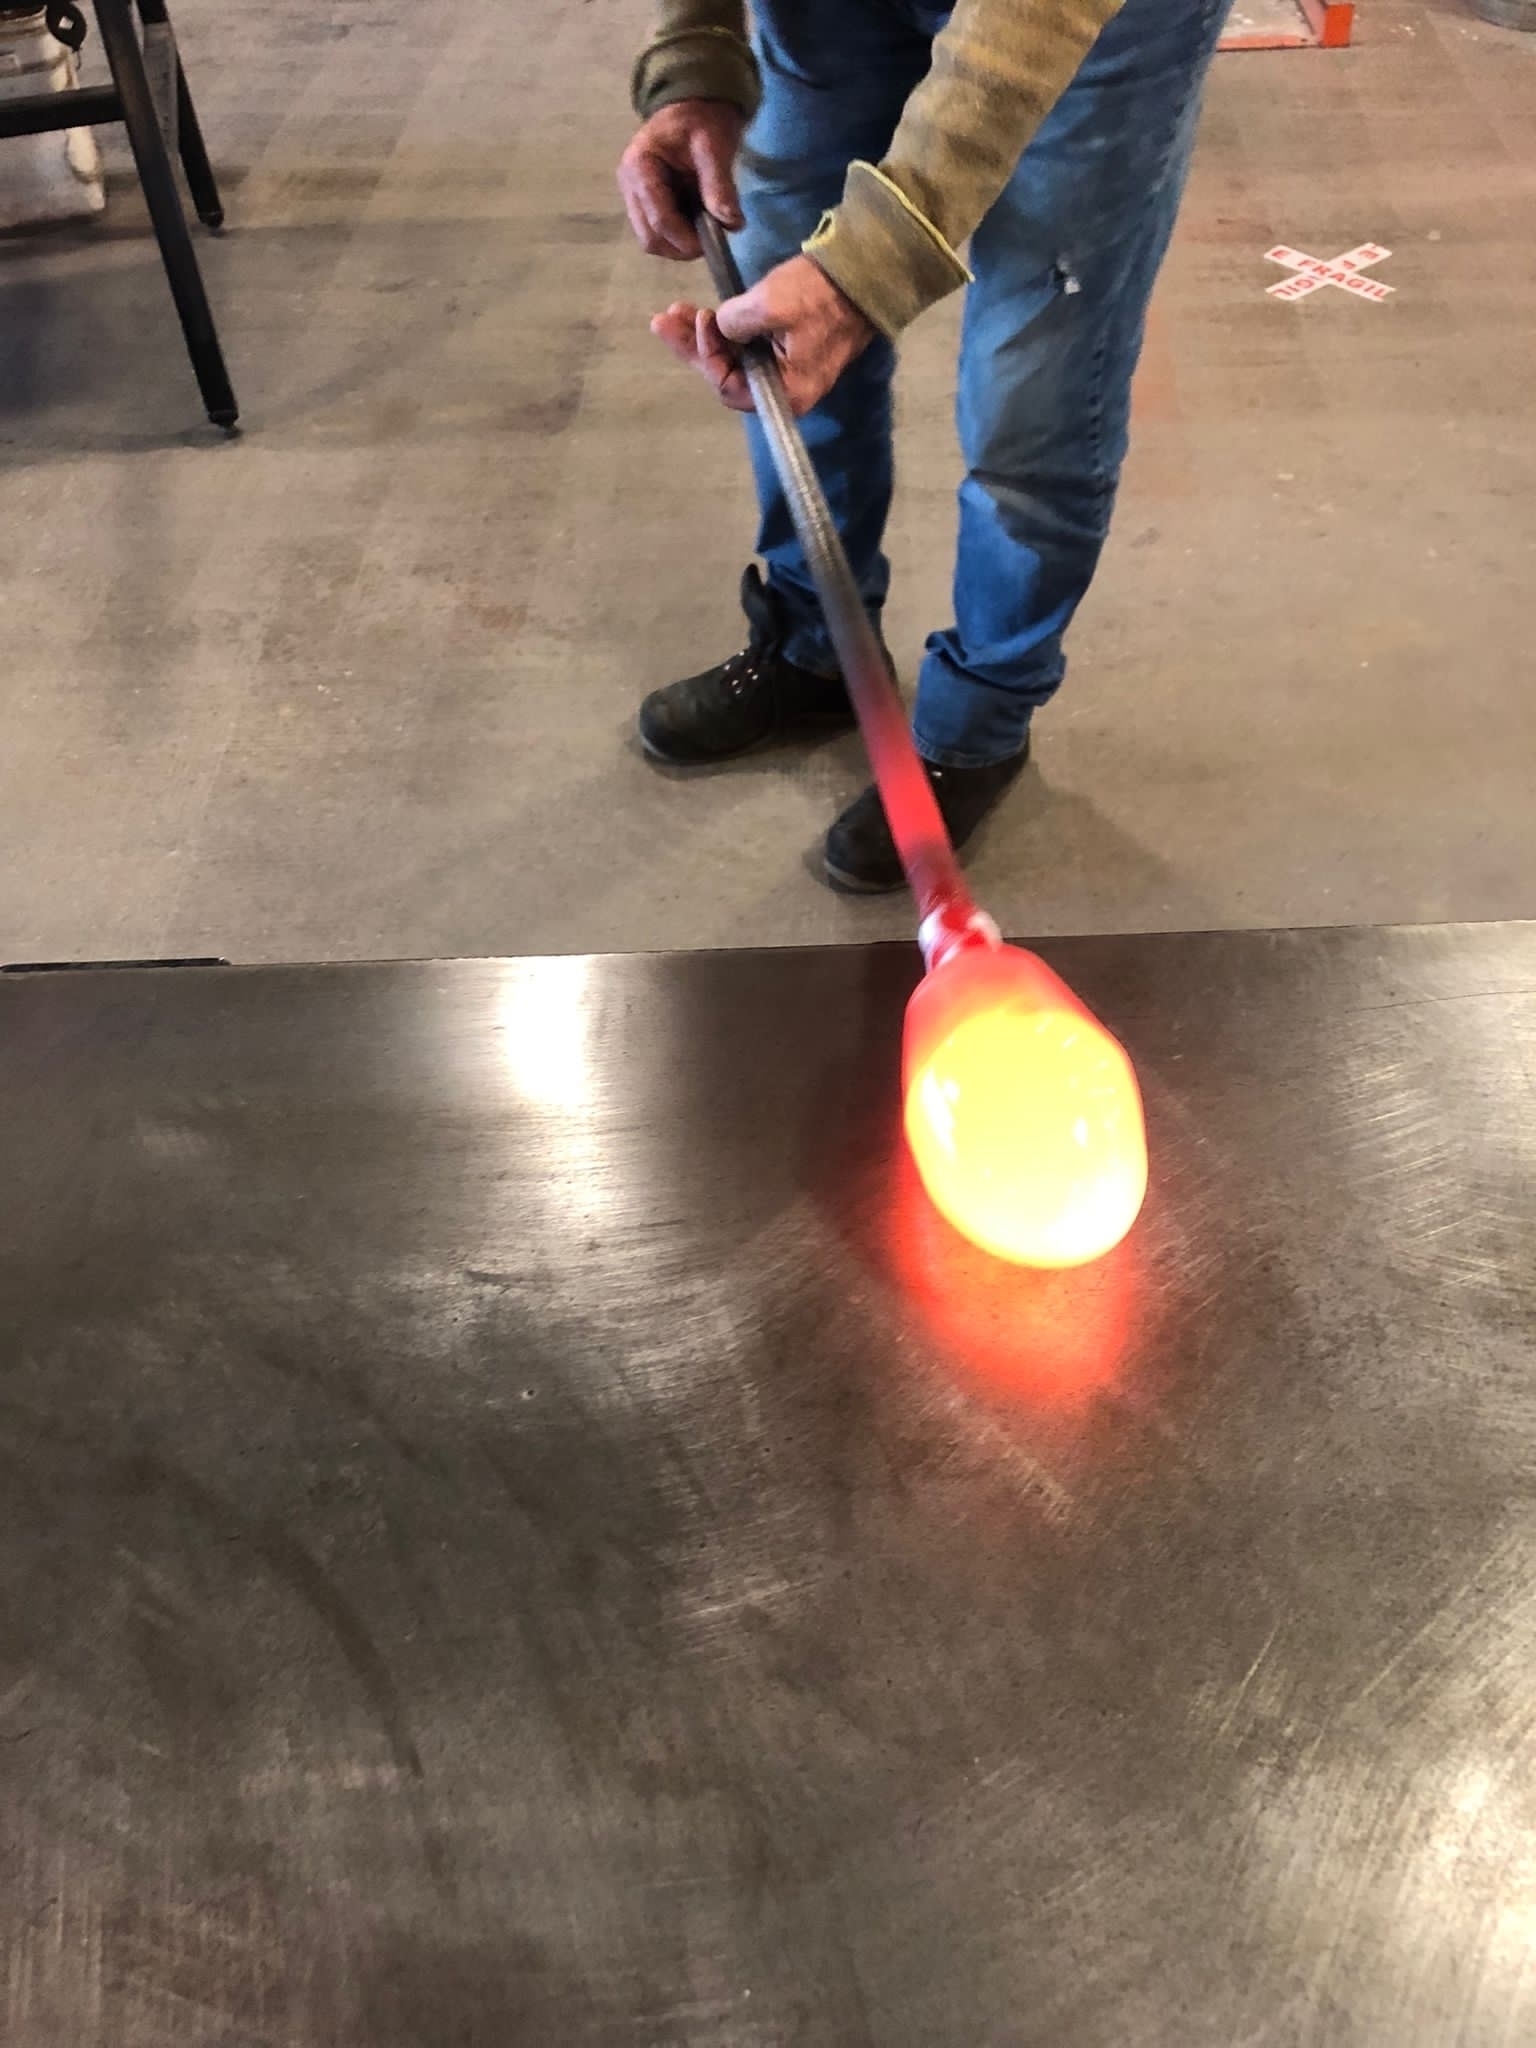 Molten glass on the end of a rod being worked on a metal counter top.